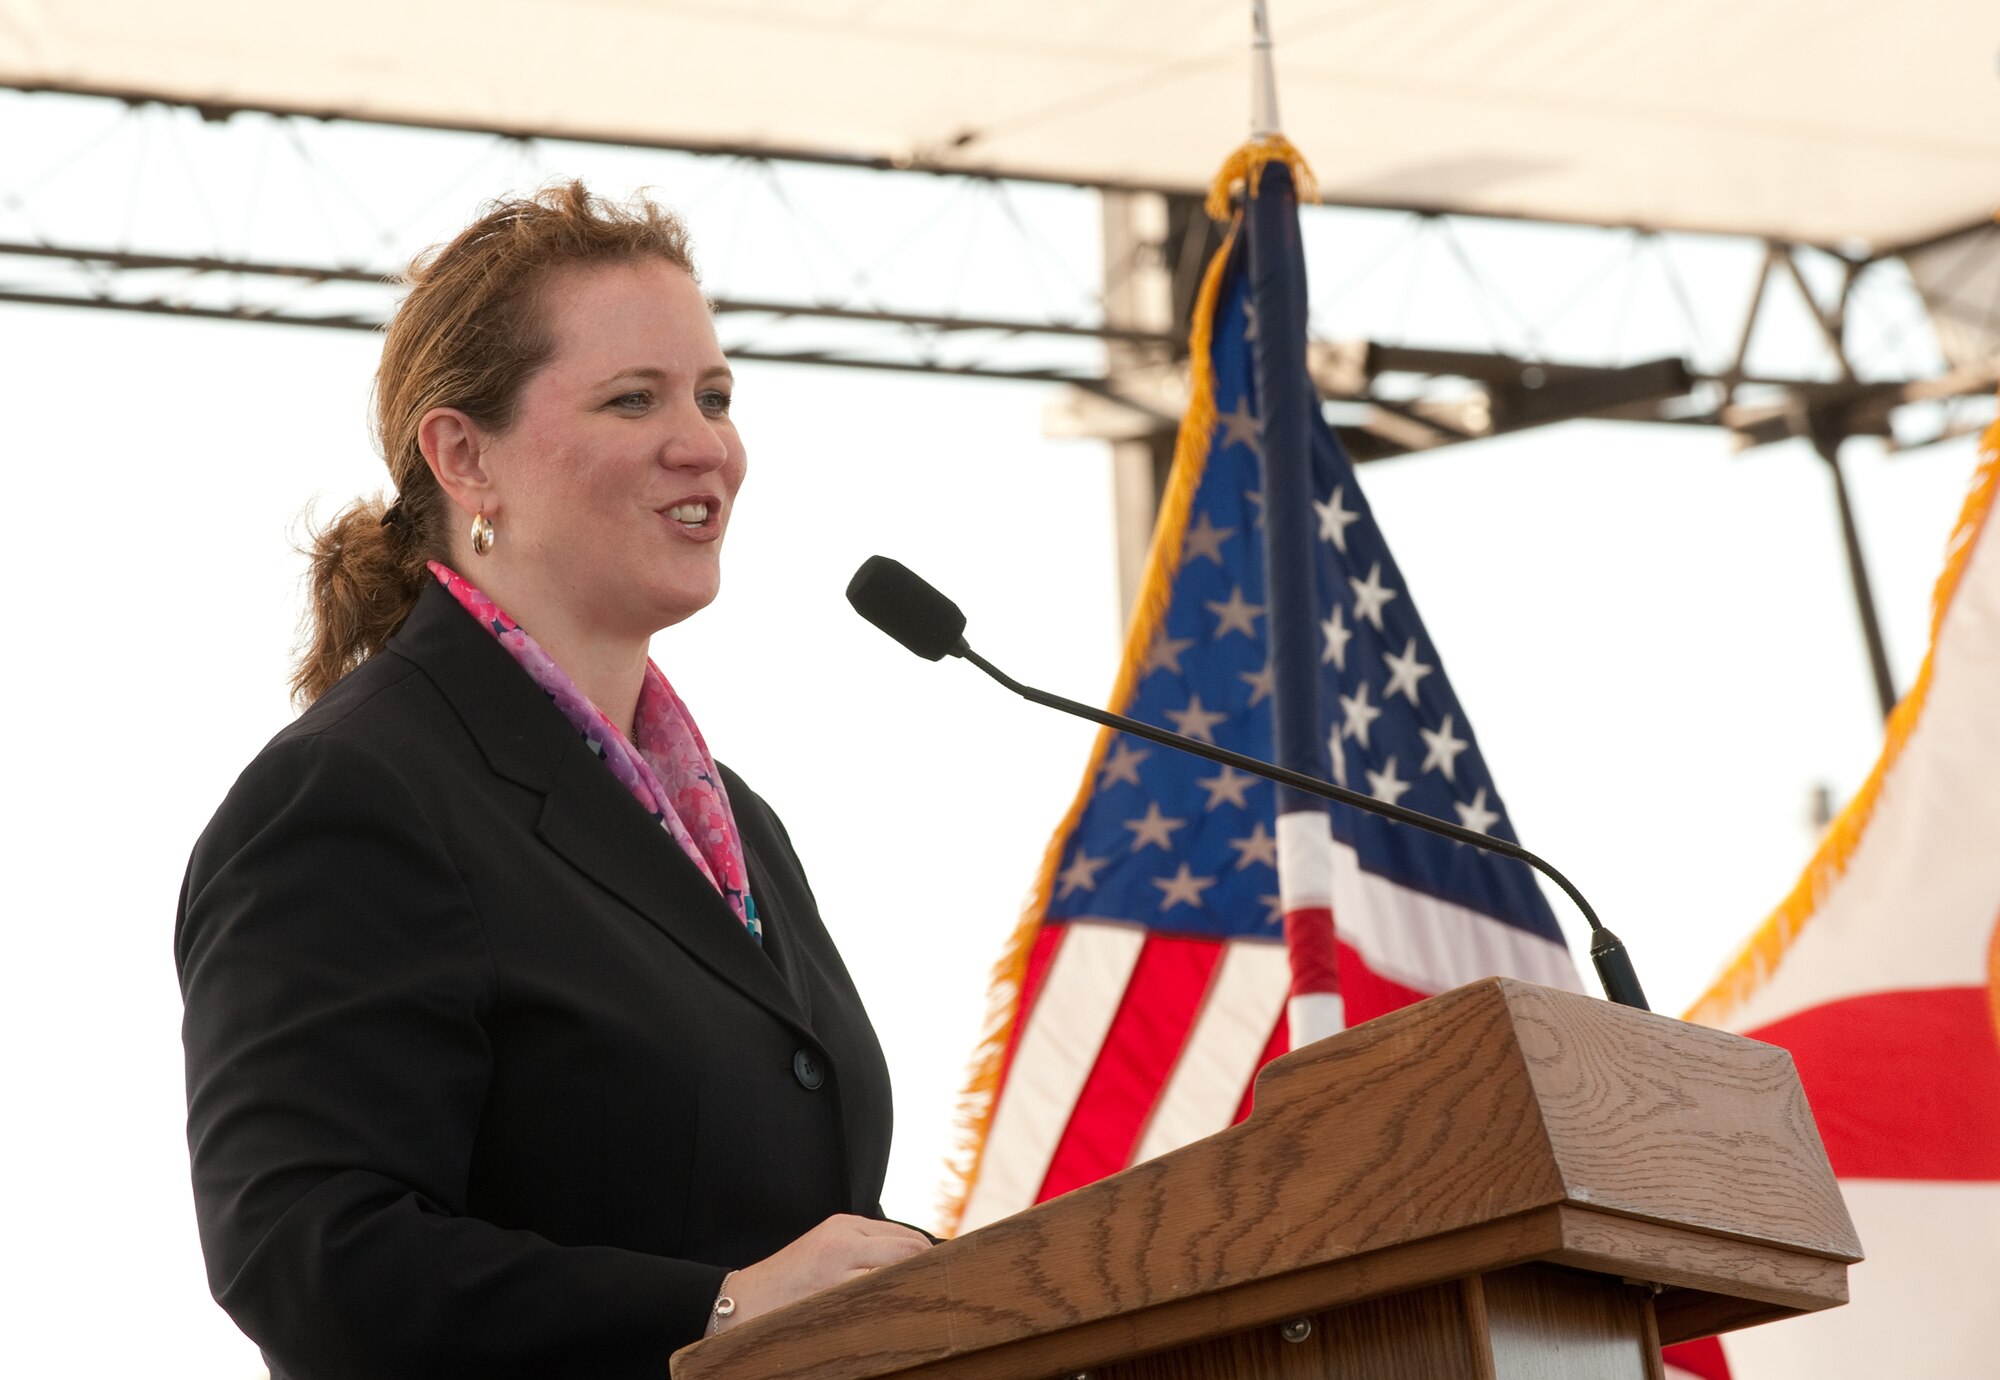 Undersecretary of the Air Force Erin C. Conaton addresses the audience in Cocoa Beach, Fla., Oct. 26, 2010, during the Proclamation Ceremony that formally launches Air Force Week Cocoa Beach.  Air Force Week continues through Oct. 31.(U.S. Air Force photo/ Lance Cheung)